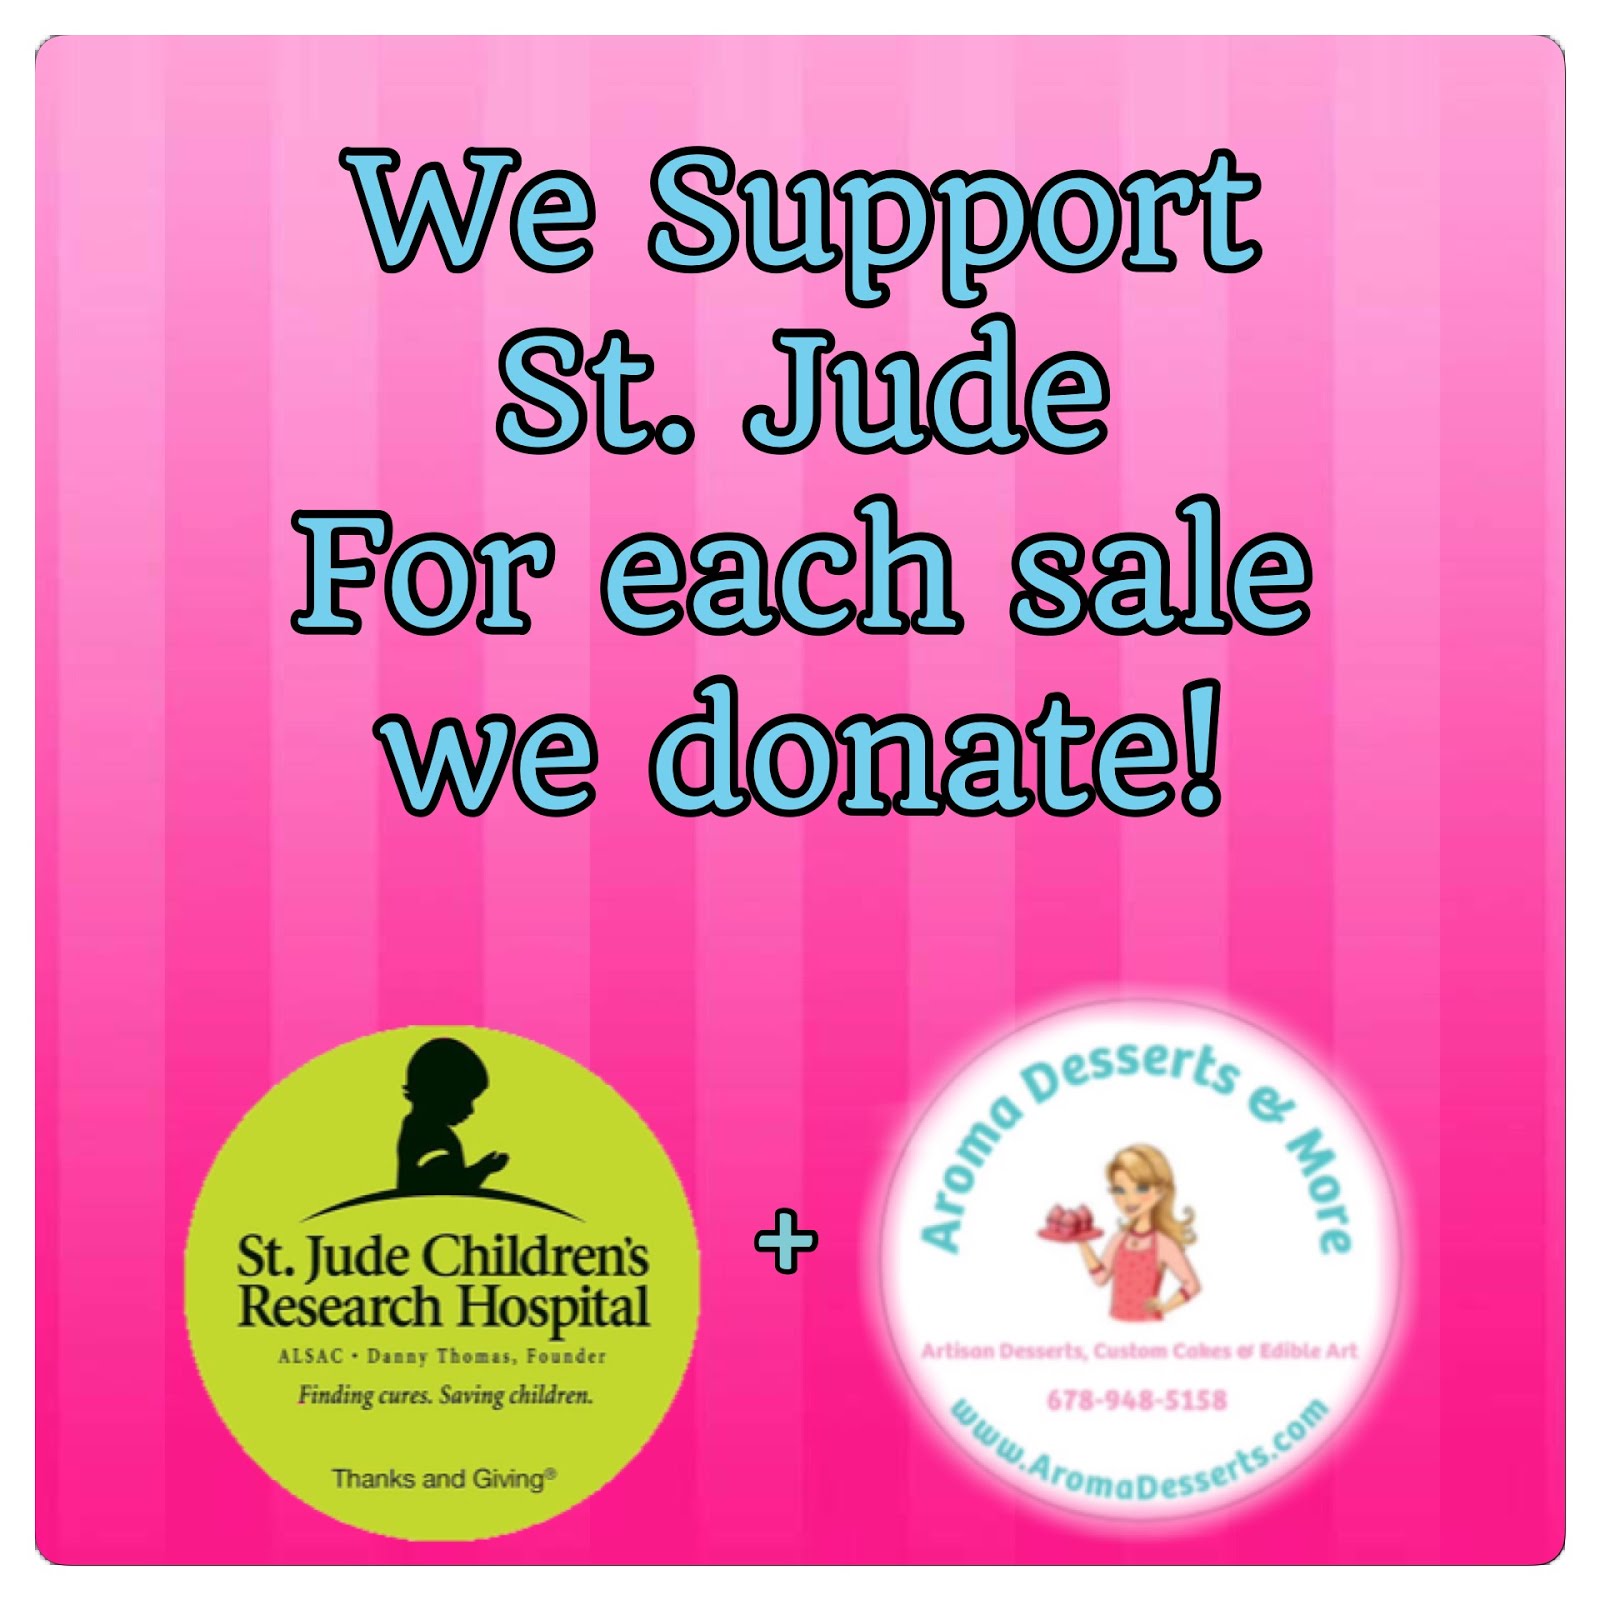 We Support St. Jude Children Research Hospital